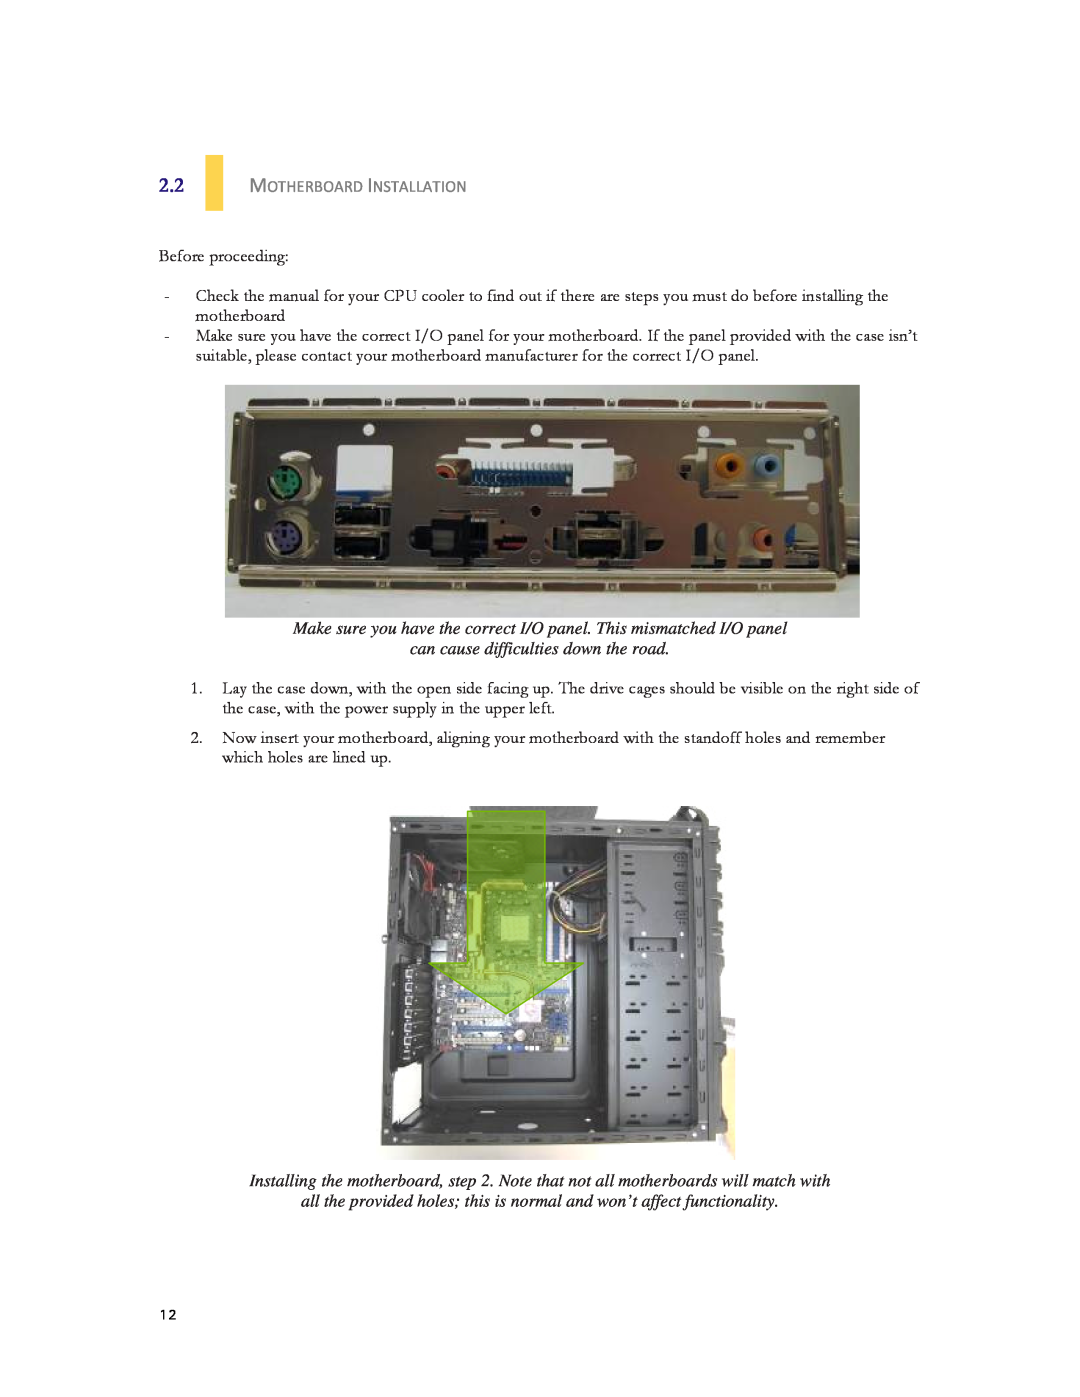 Antec DF-35 user manual Motherboard Installation, Before proceeding, can cause difficulties down the road 